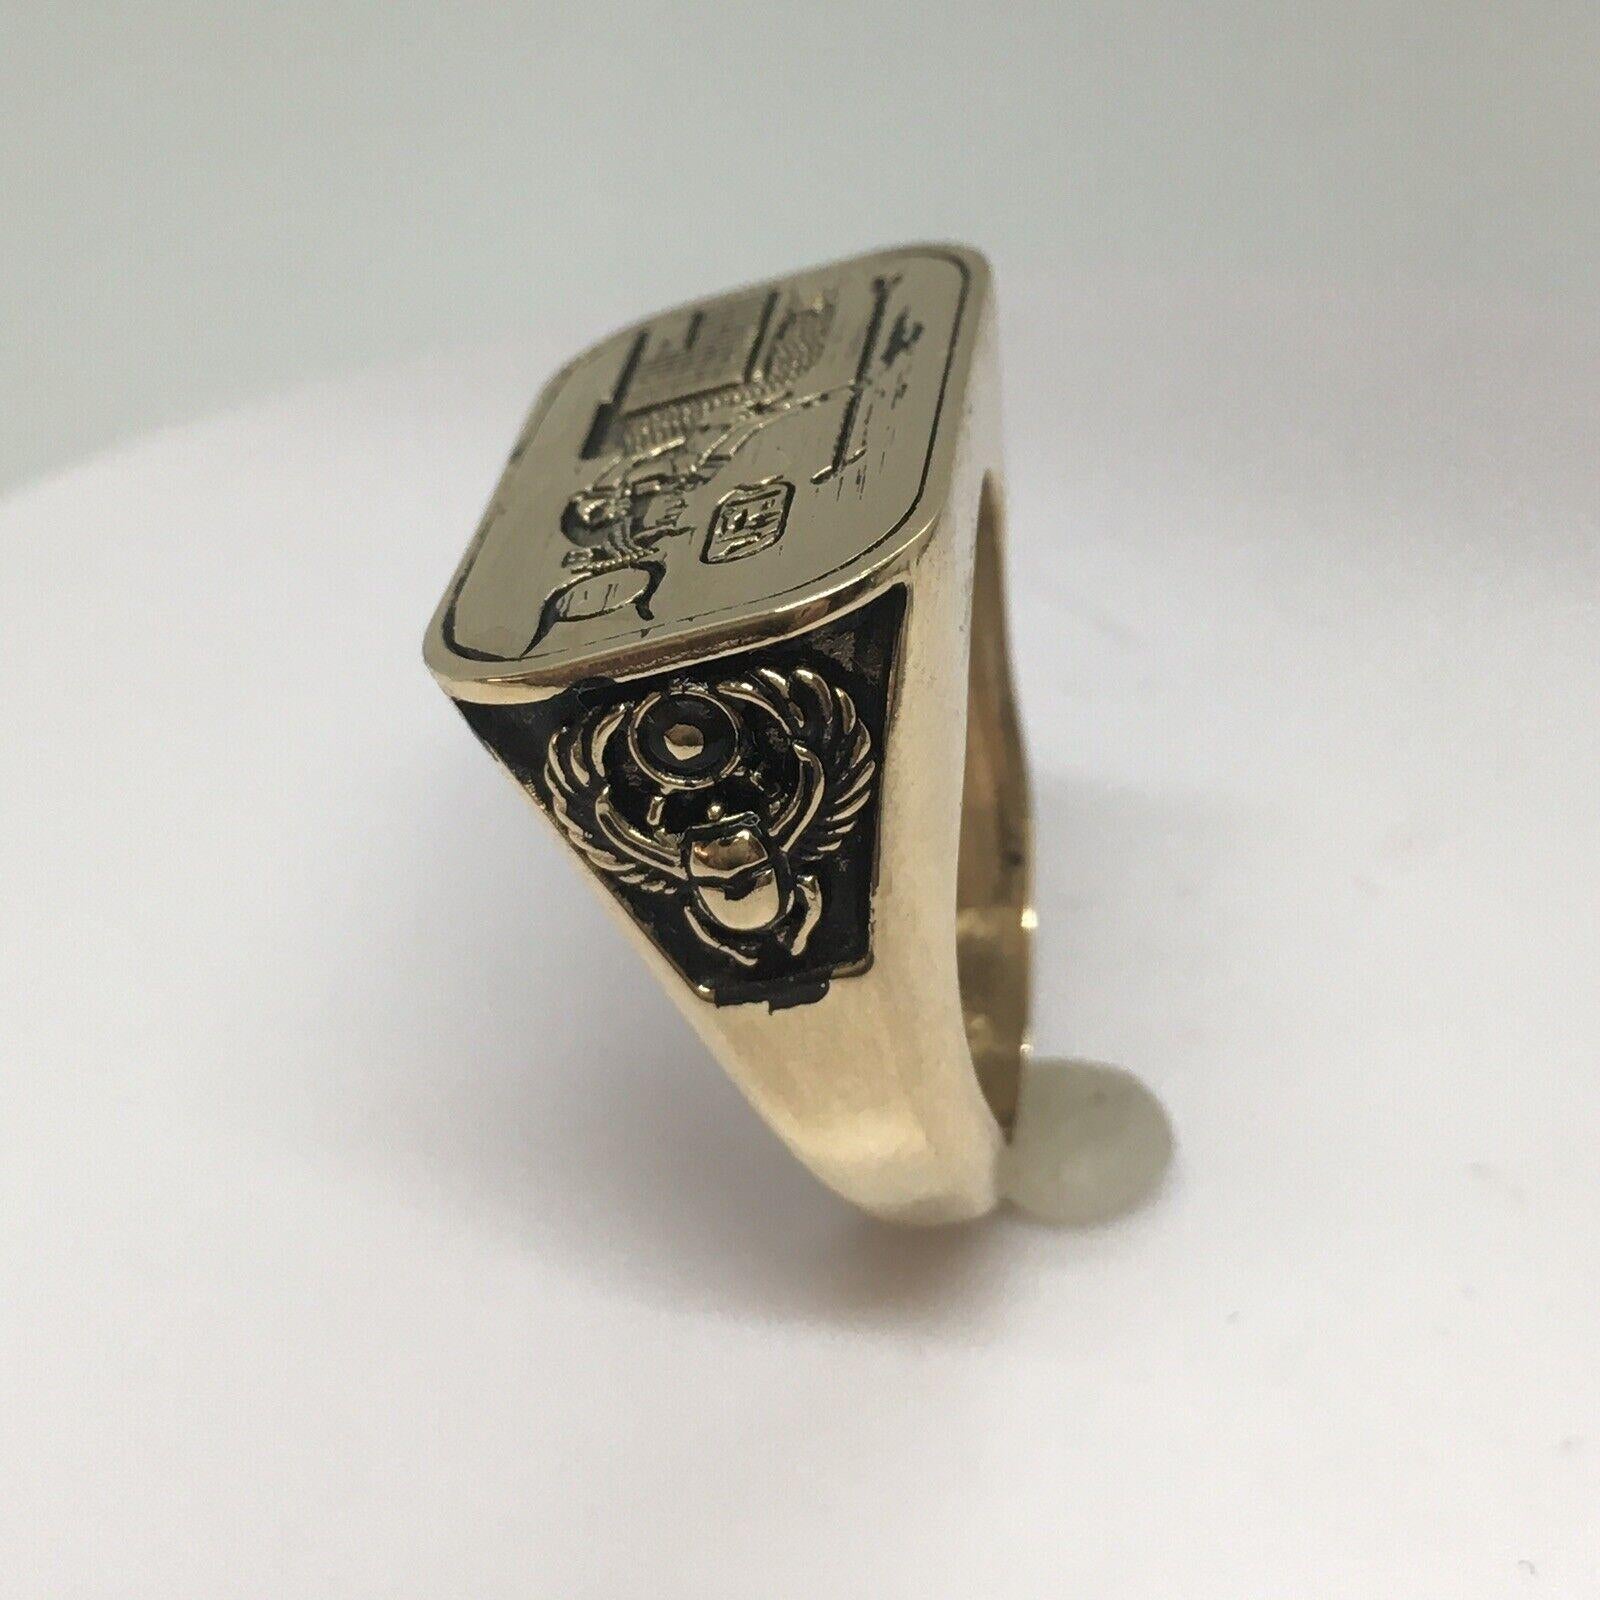 Vintage 14K Solid Gold  Egyptian Ramesses II Statement Ring 

14.7 Gram
Size 11
15mm by 25mm long 5 mm deep